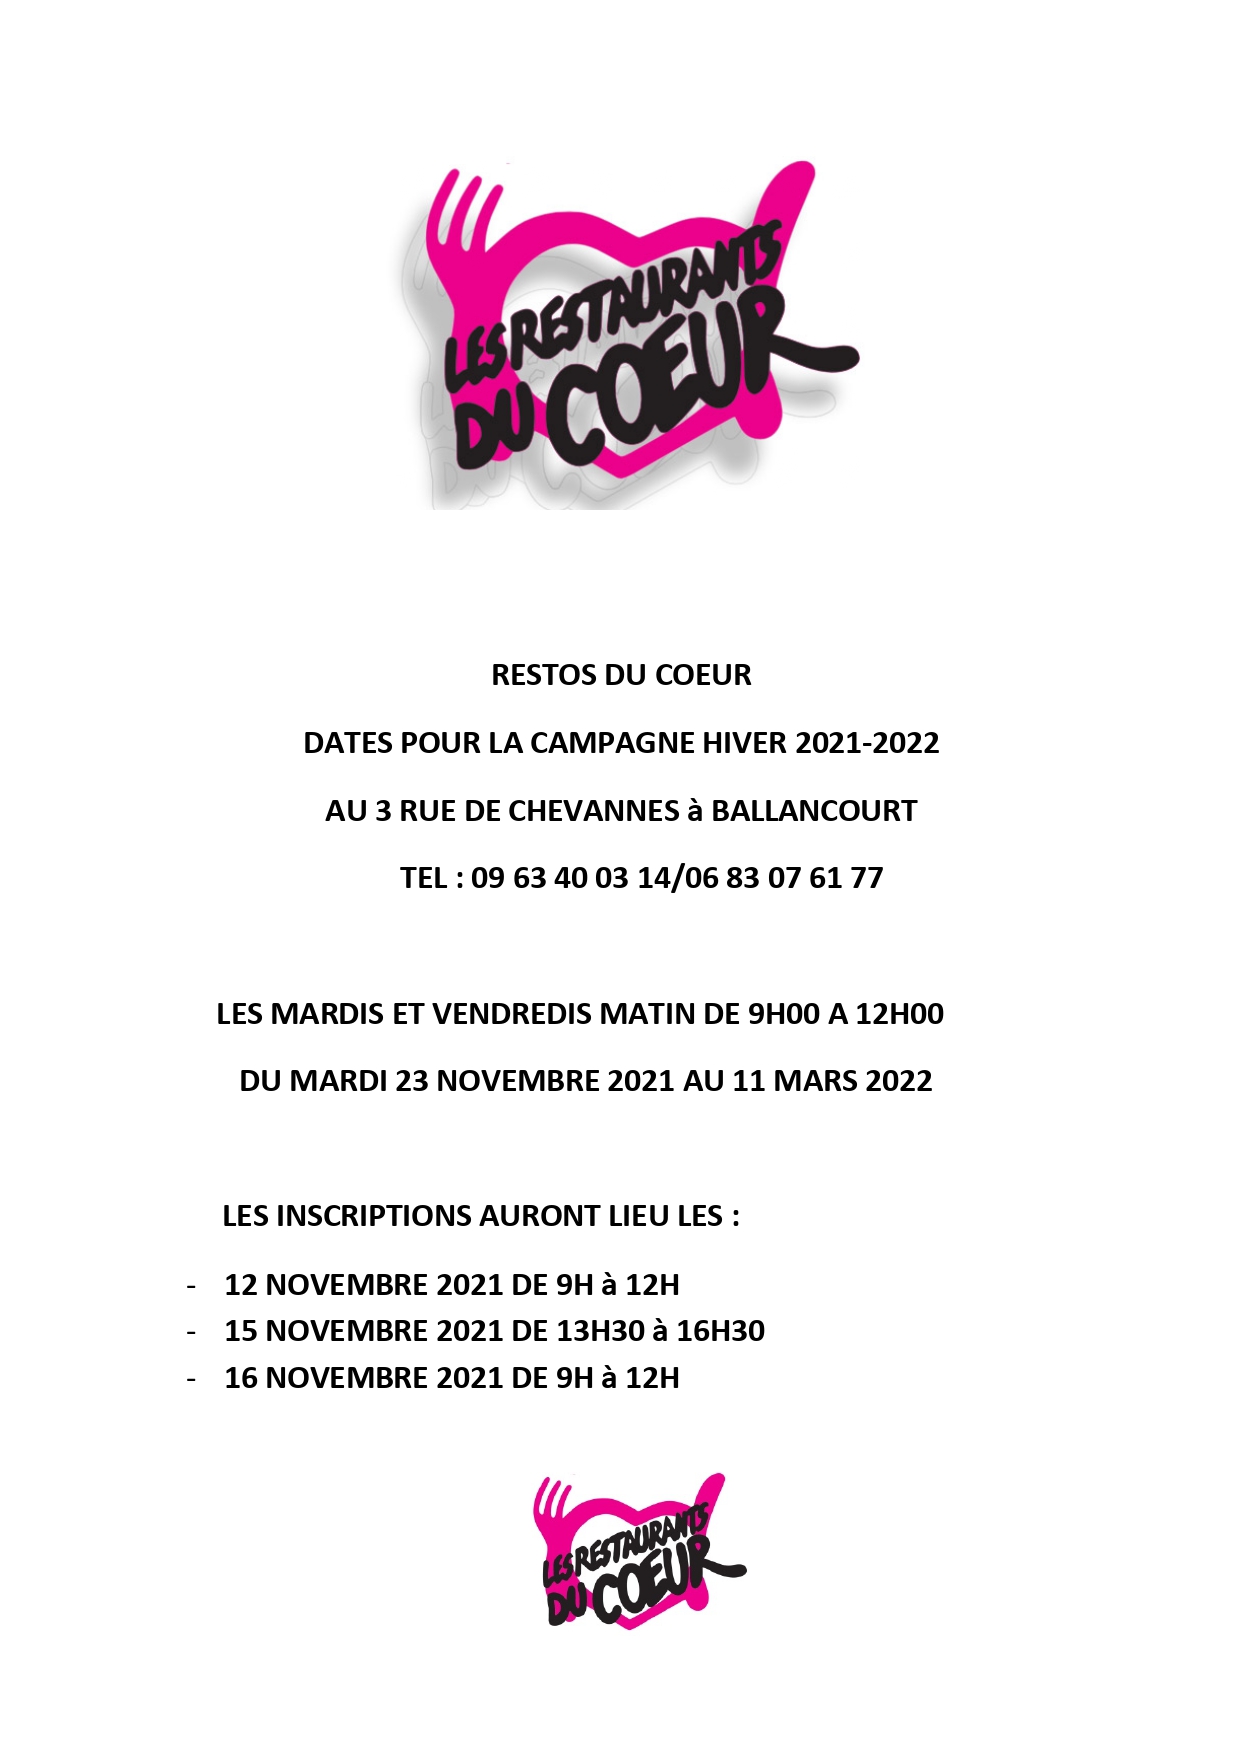 Rest coeur DATES CAMPAGNE HIVER 2021 2022_page-0001.jpg